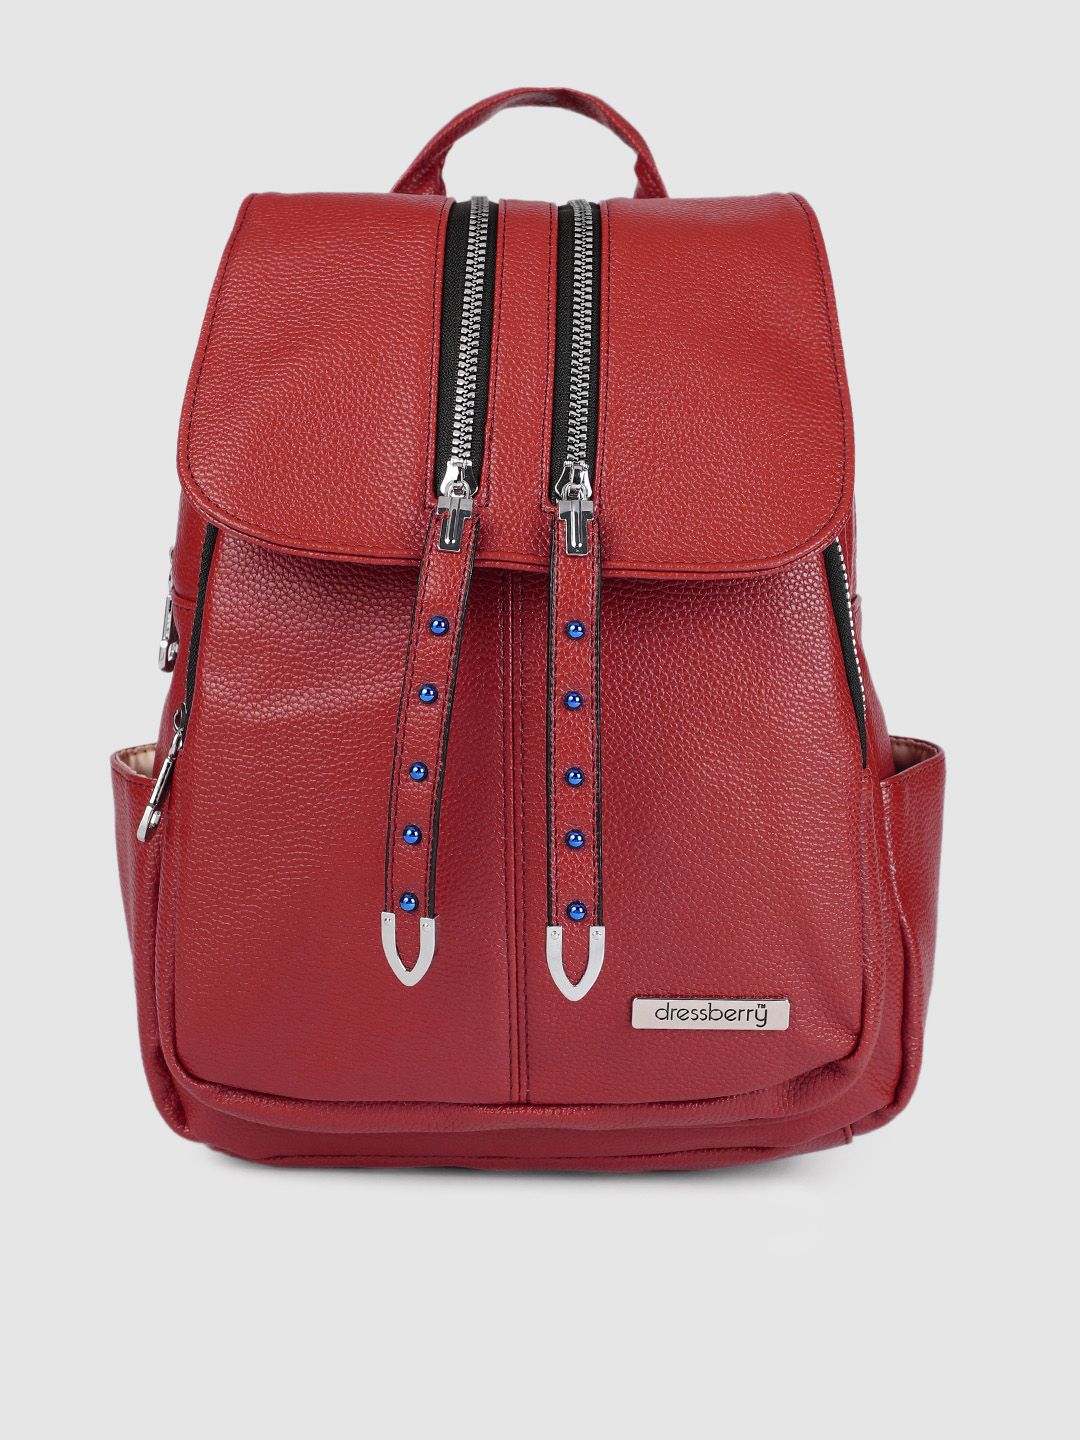 DressBerry Women Red Backpack Price in India